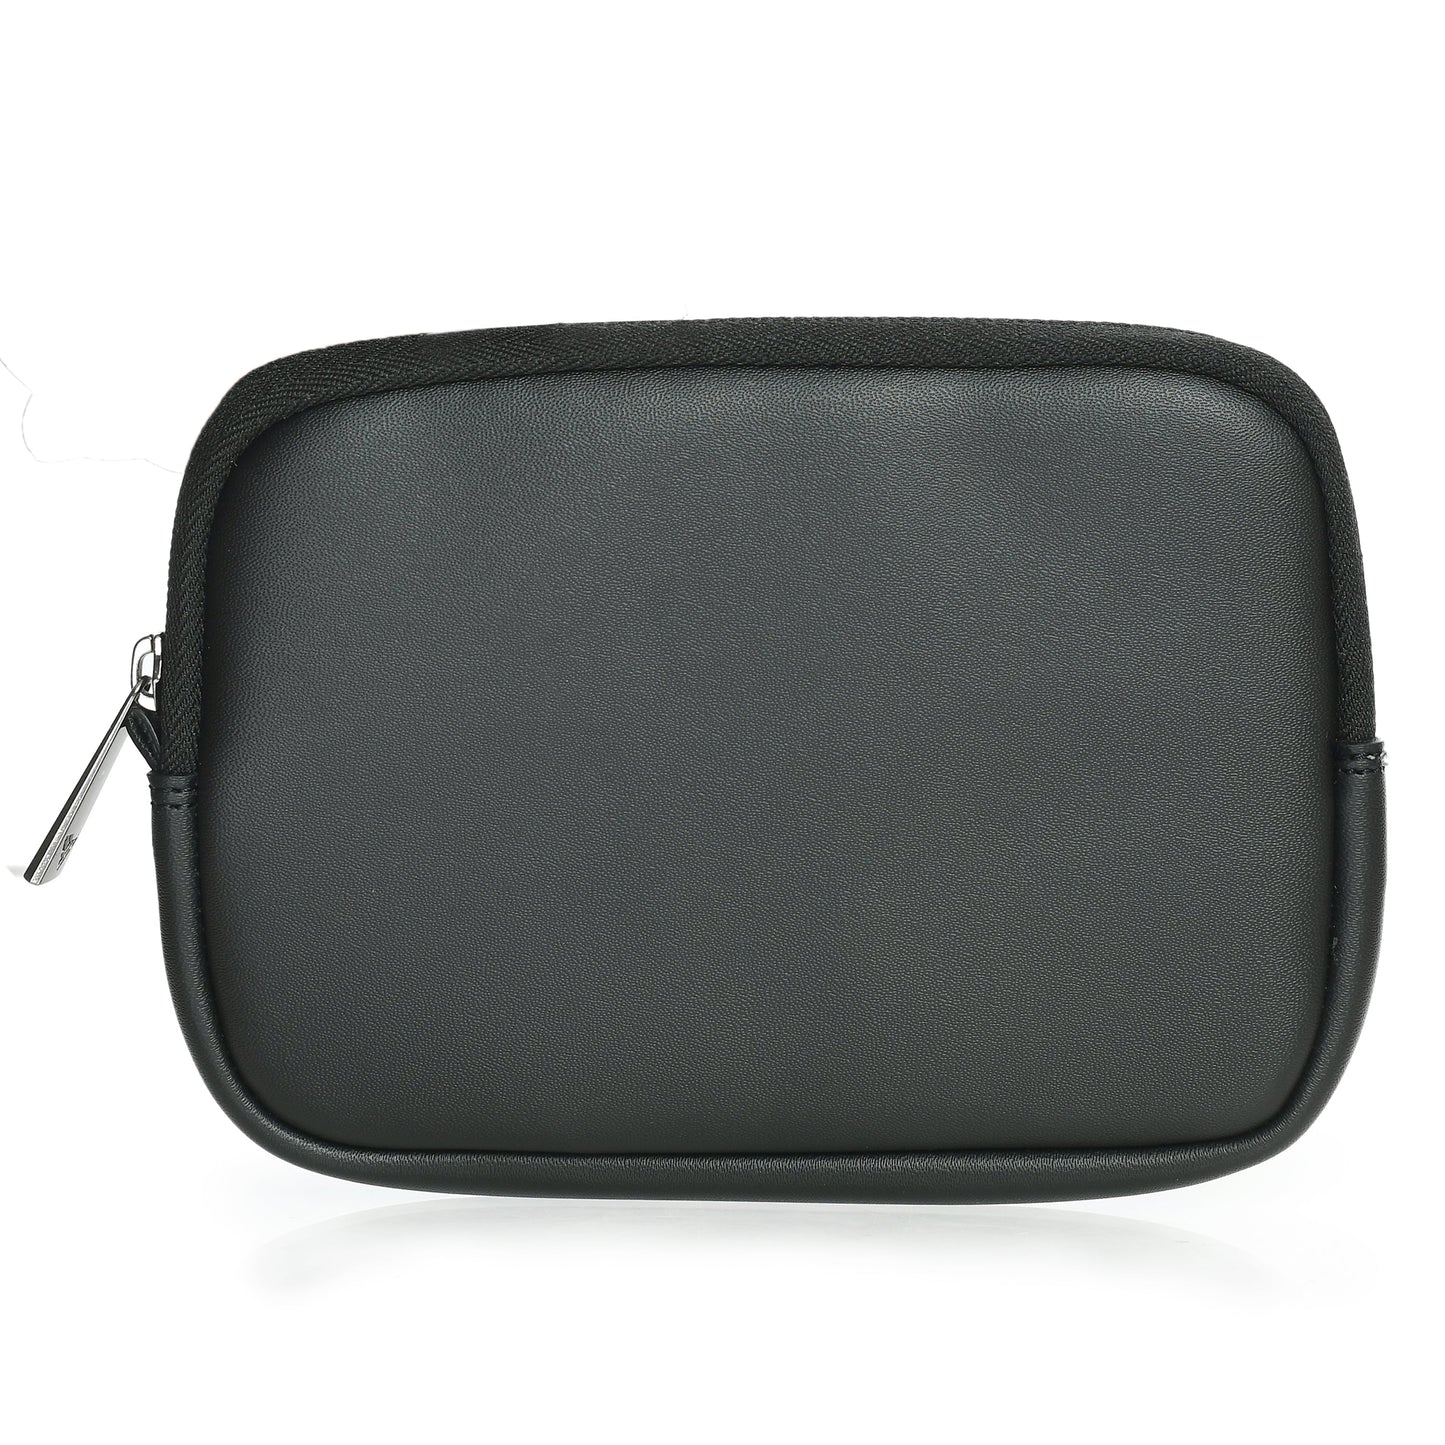 vaku-luxos®-da-italiano-refined-leather-sleeve-with-free-pouch-strap-highly-durable-compatilbe-for-macbook-14-black8905129015114